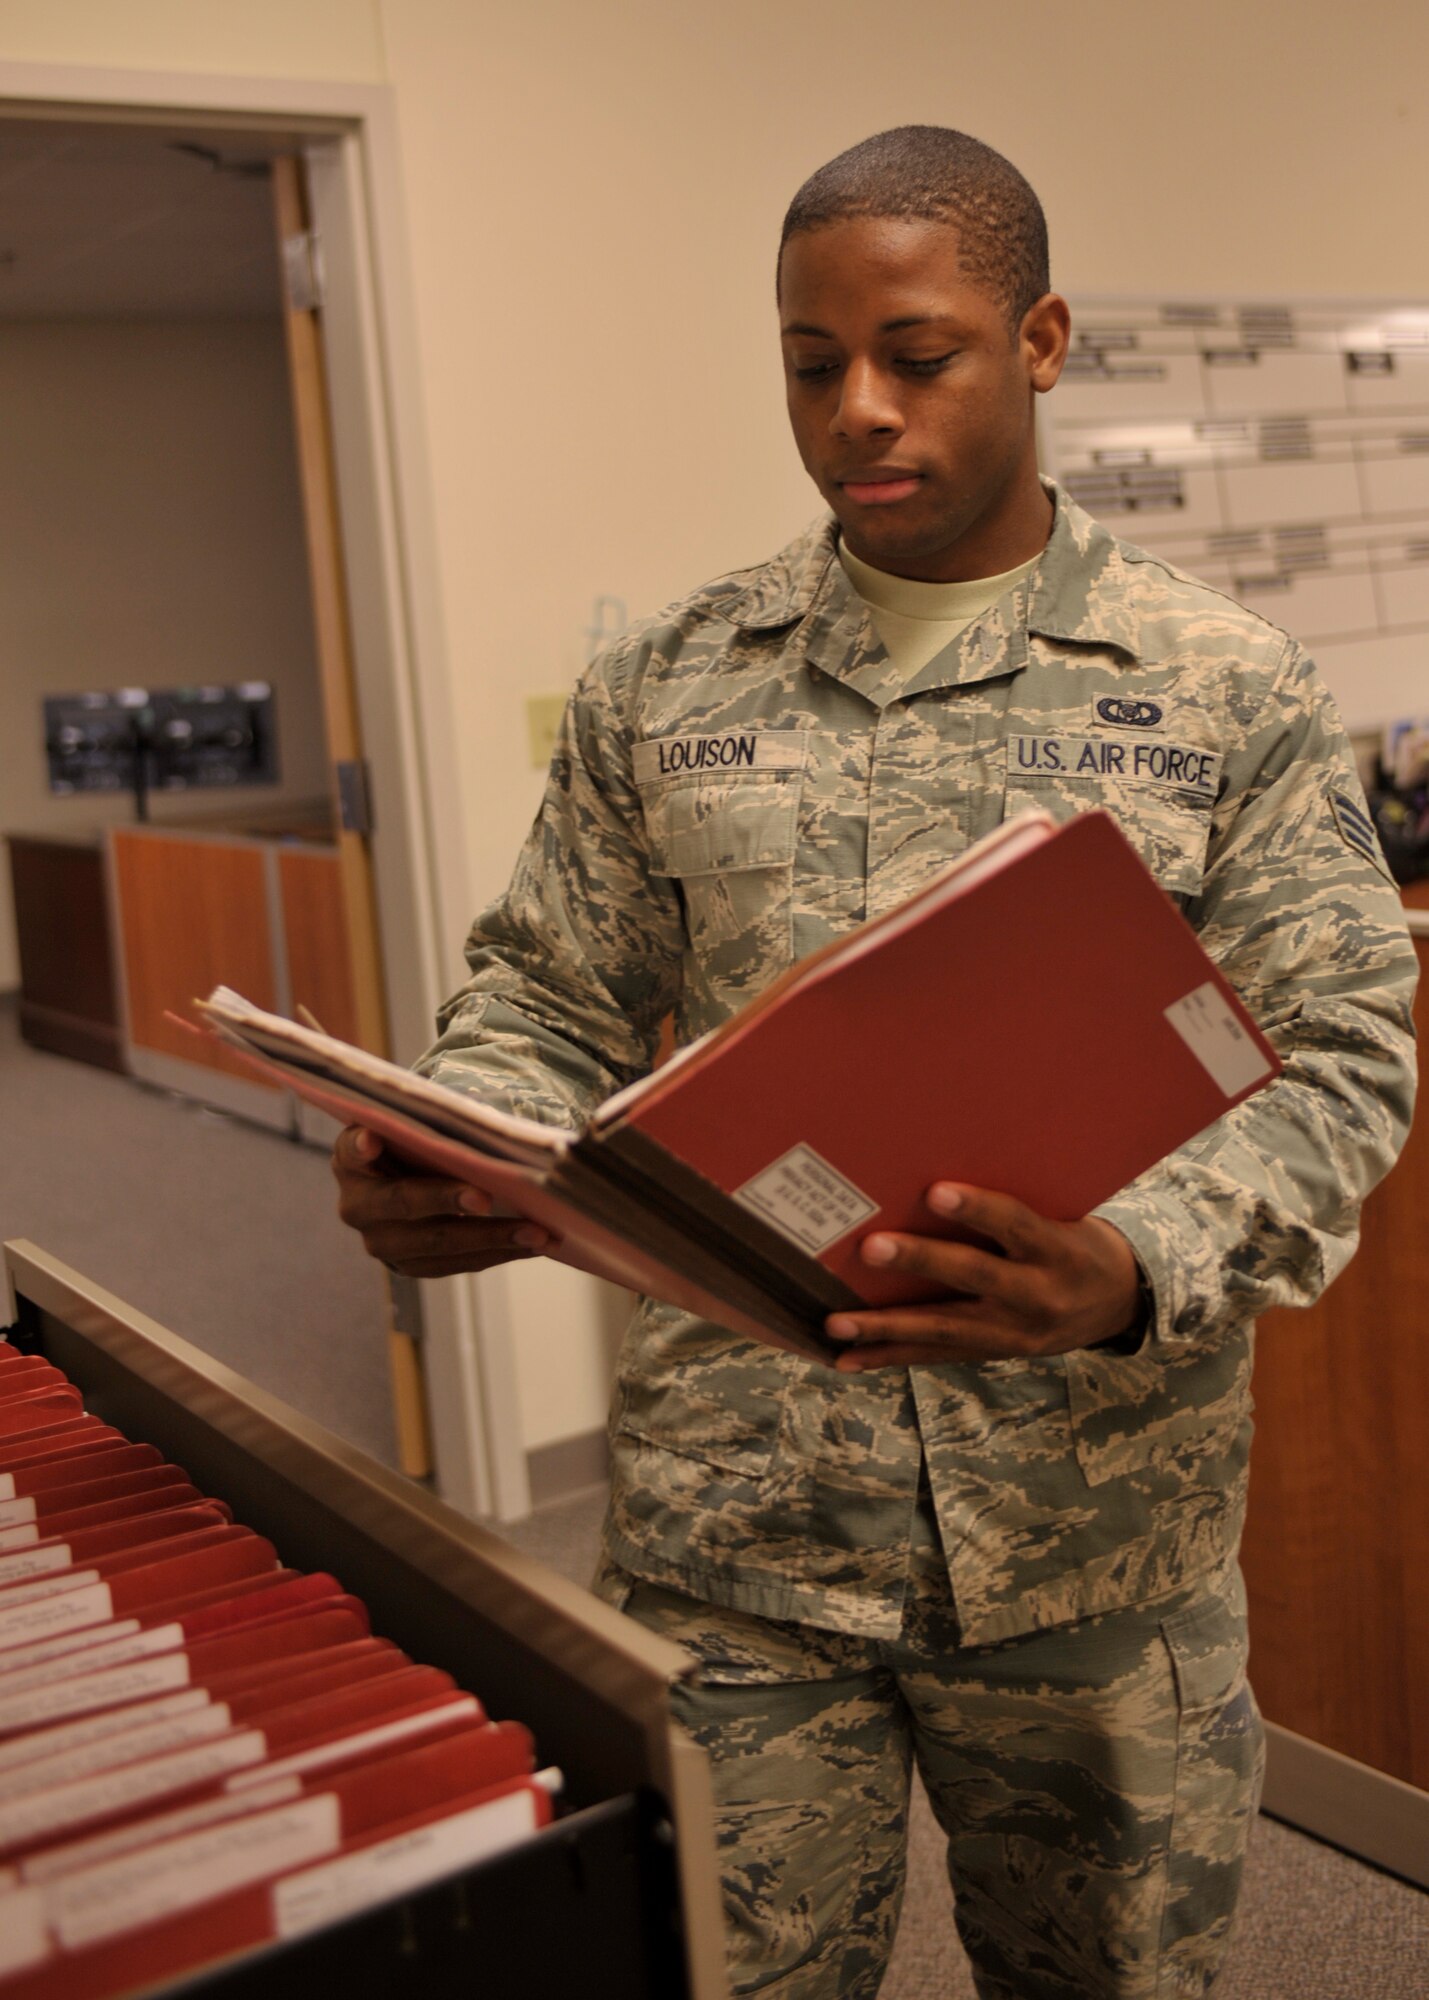 Senior Airman Christopher Louison, 92nd Air Refueling Squadron aviation resource management apprentice, looks through a training file Jan. 21, 2015, at Fairchild Air Force Base, Wash. Louison’s leadership selected him as one of Fairchild’s Finest, a weekly recognition program that highlights top-performing Airmen. (U.S. Air Force photo/Airman 1st Class Taylor Bourgeous)